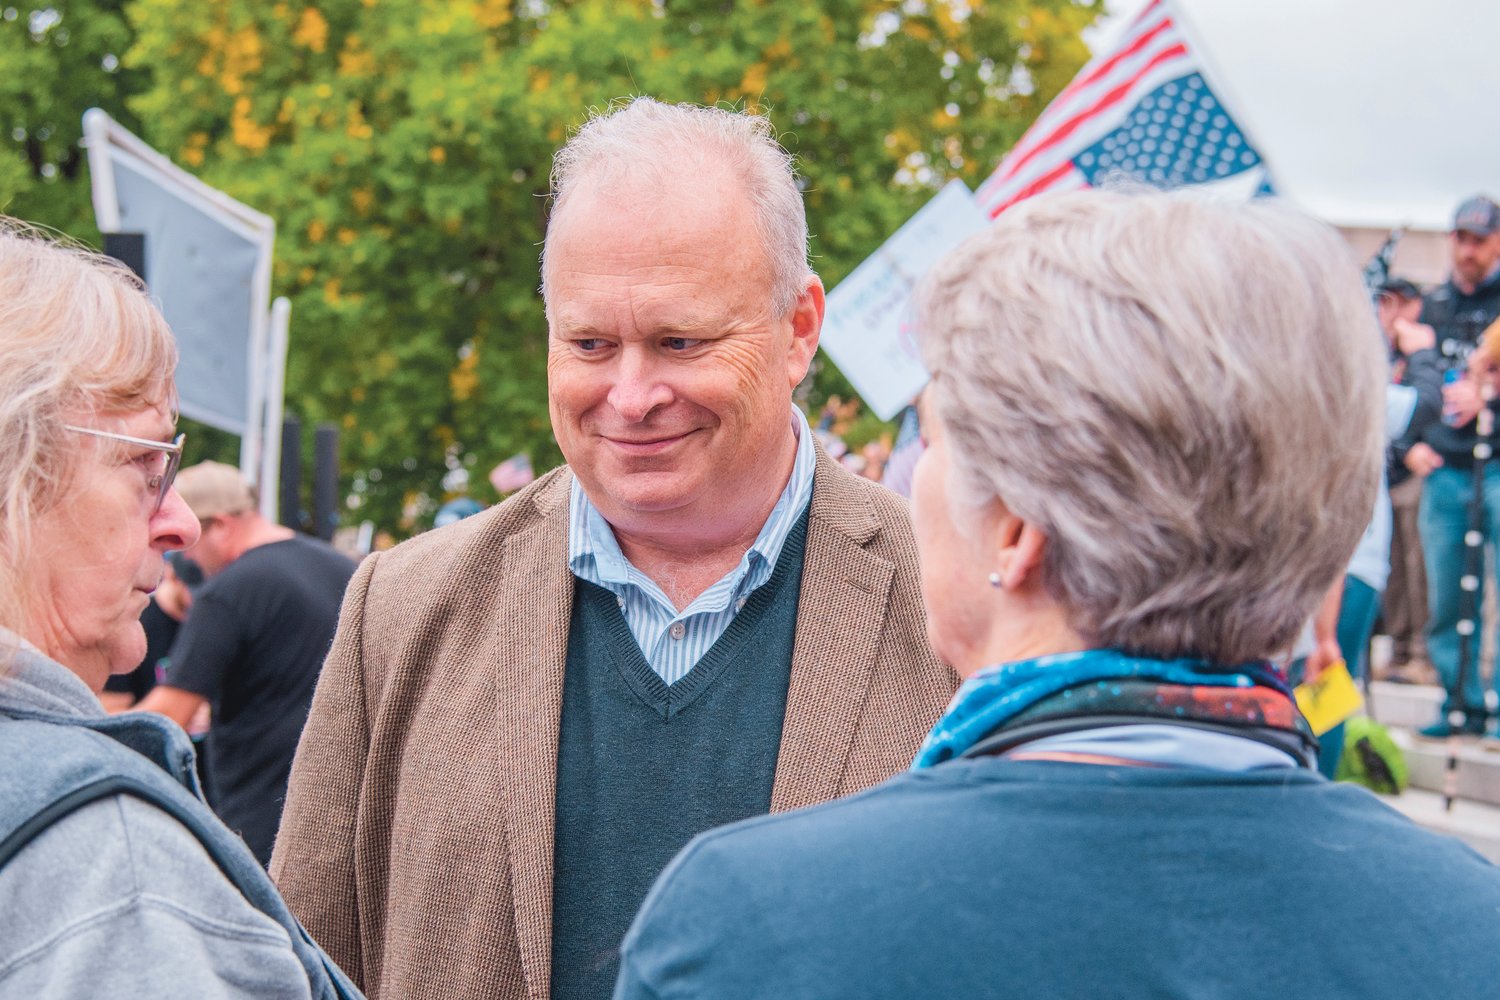 Representative Jim Walsh smiles while mingling with attendees of a “Medical Freedom Rally” outside the Washington State Capitol Building in Olympia in this file photo.